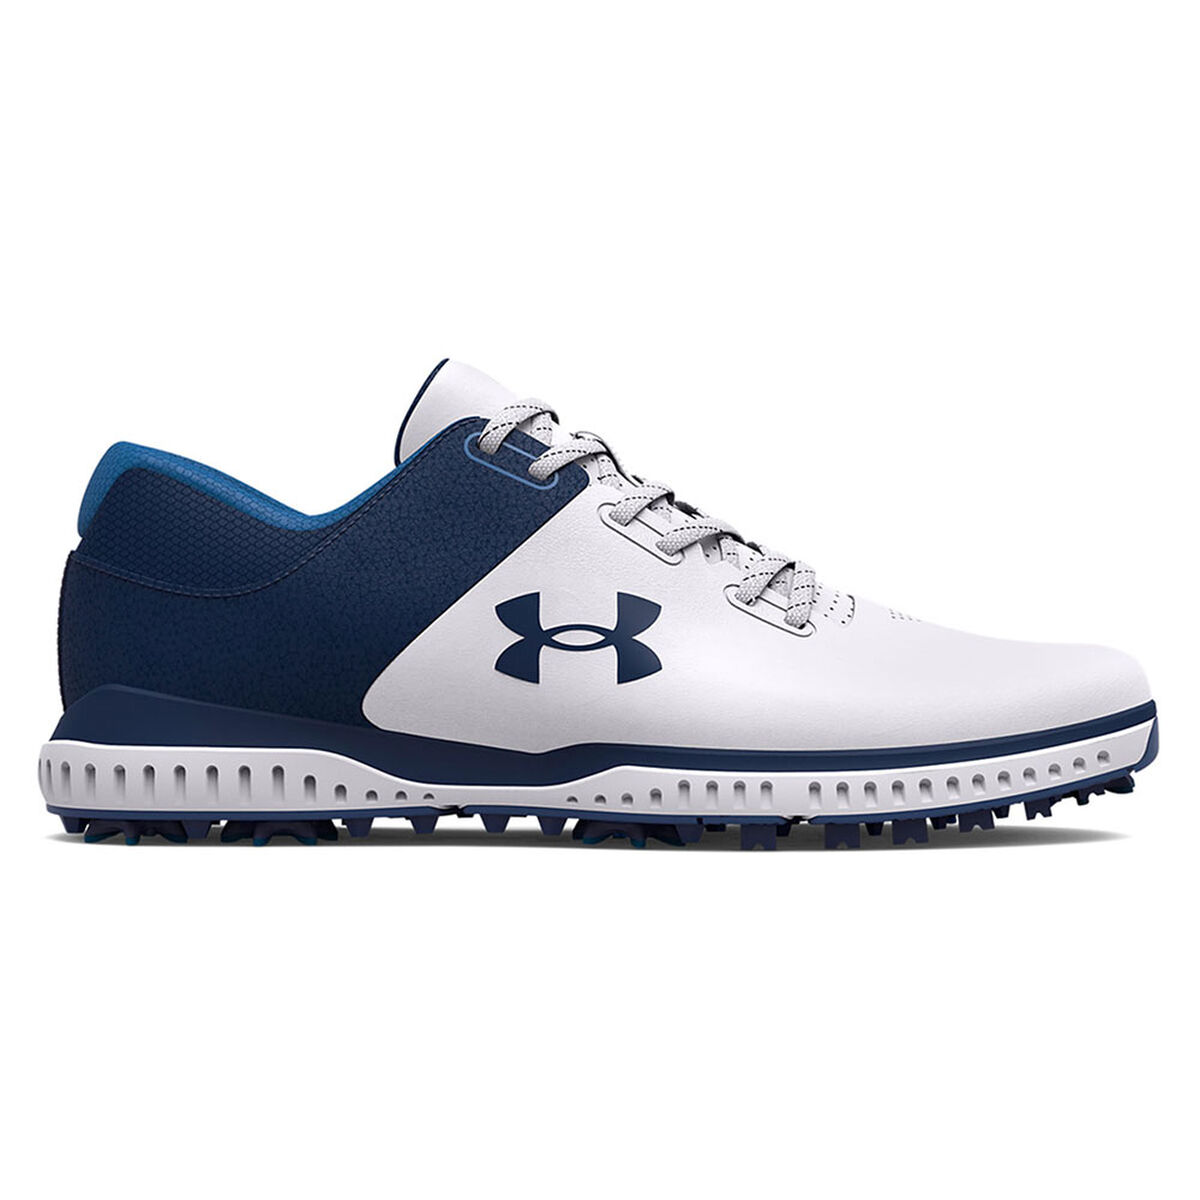 Under Armour Men’s Medal RST Waterproof Spiked Golf Shoes, Mens, White/academy/academy, 7 | American Golf